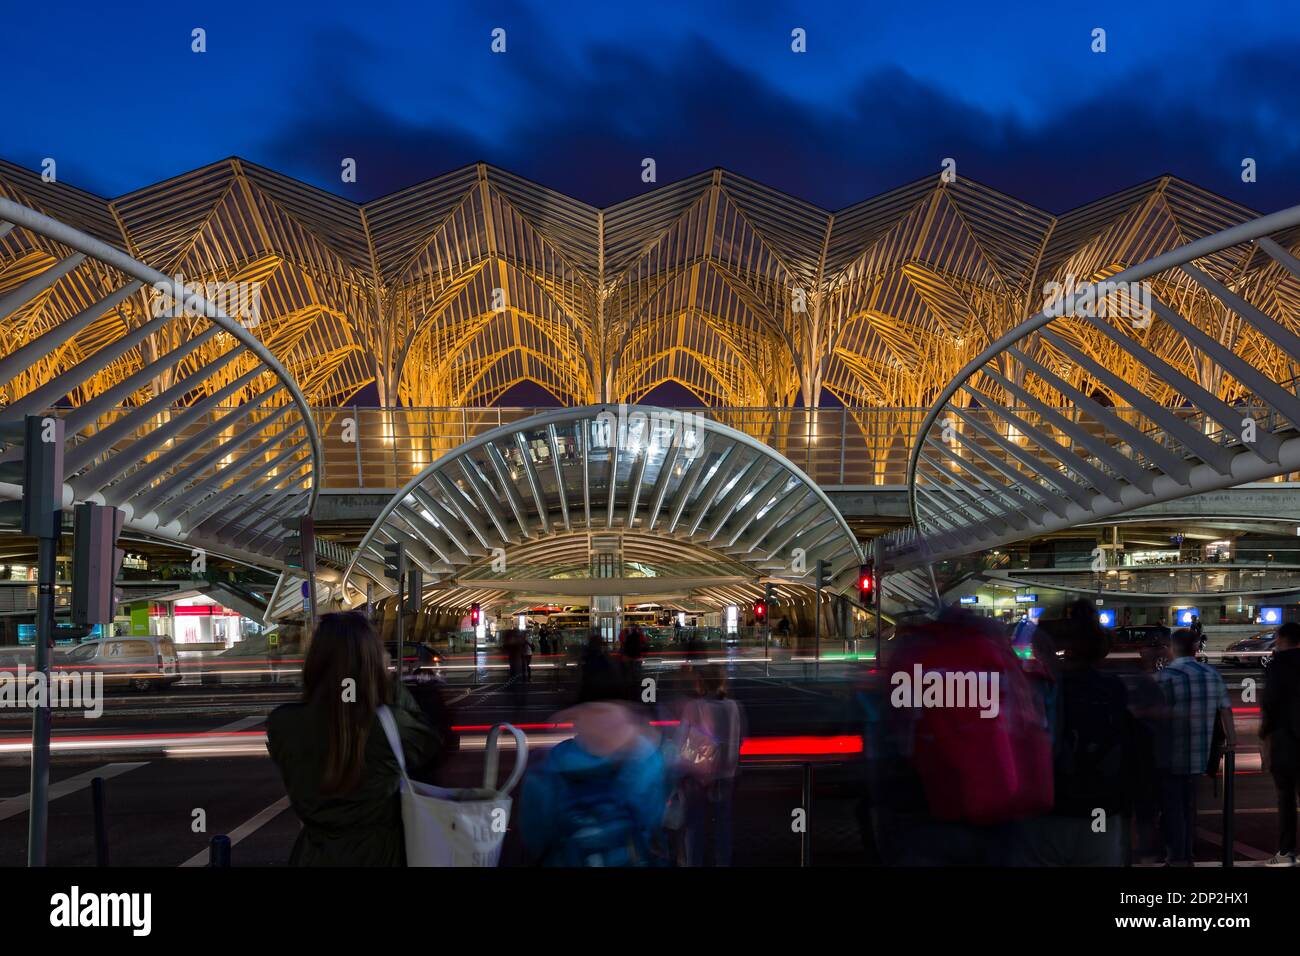 Lisbon, Portugal - May 11, 2018: Gare do Oriente railway station after sunset, Lisbon, Portugal Stock Photo